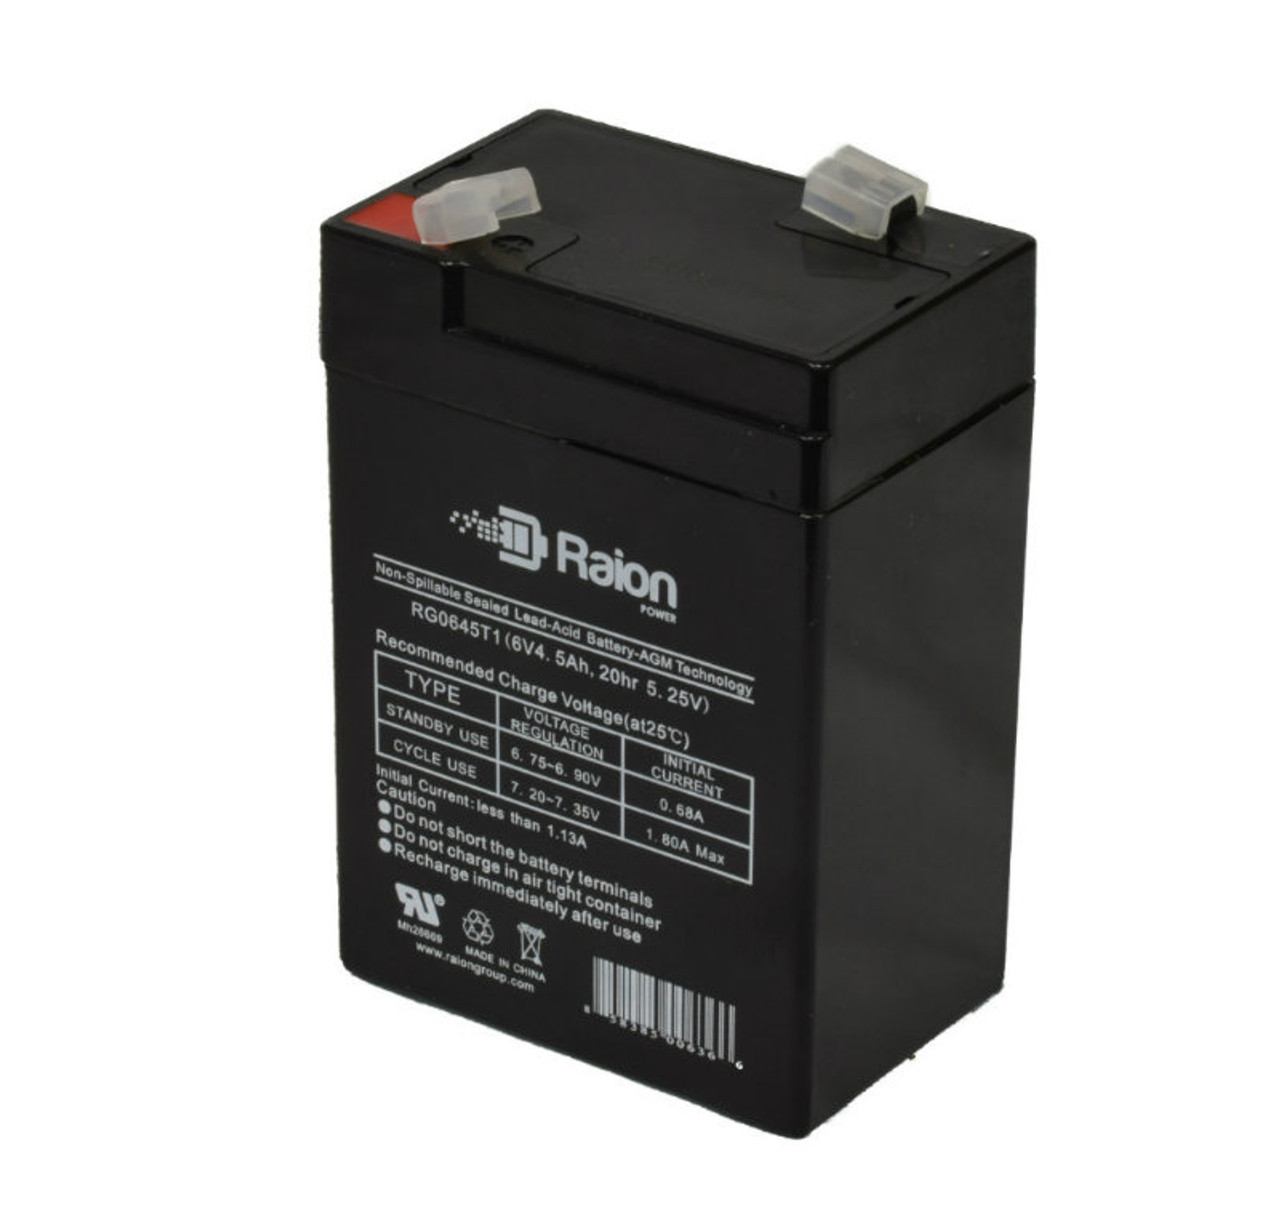 Raion Power RG0645T1 6V 4.5Ah Replacement Battery Cartridge for Weida HX6-4.5